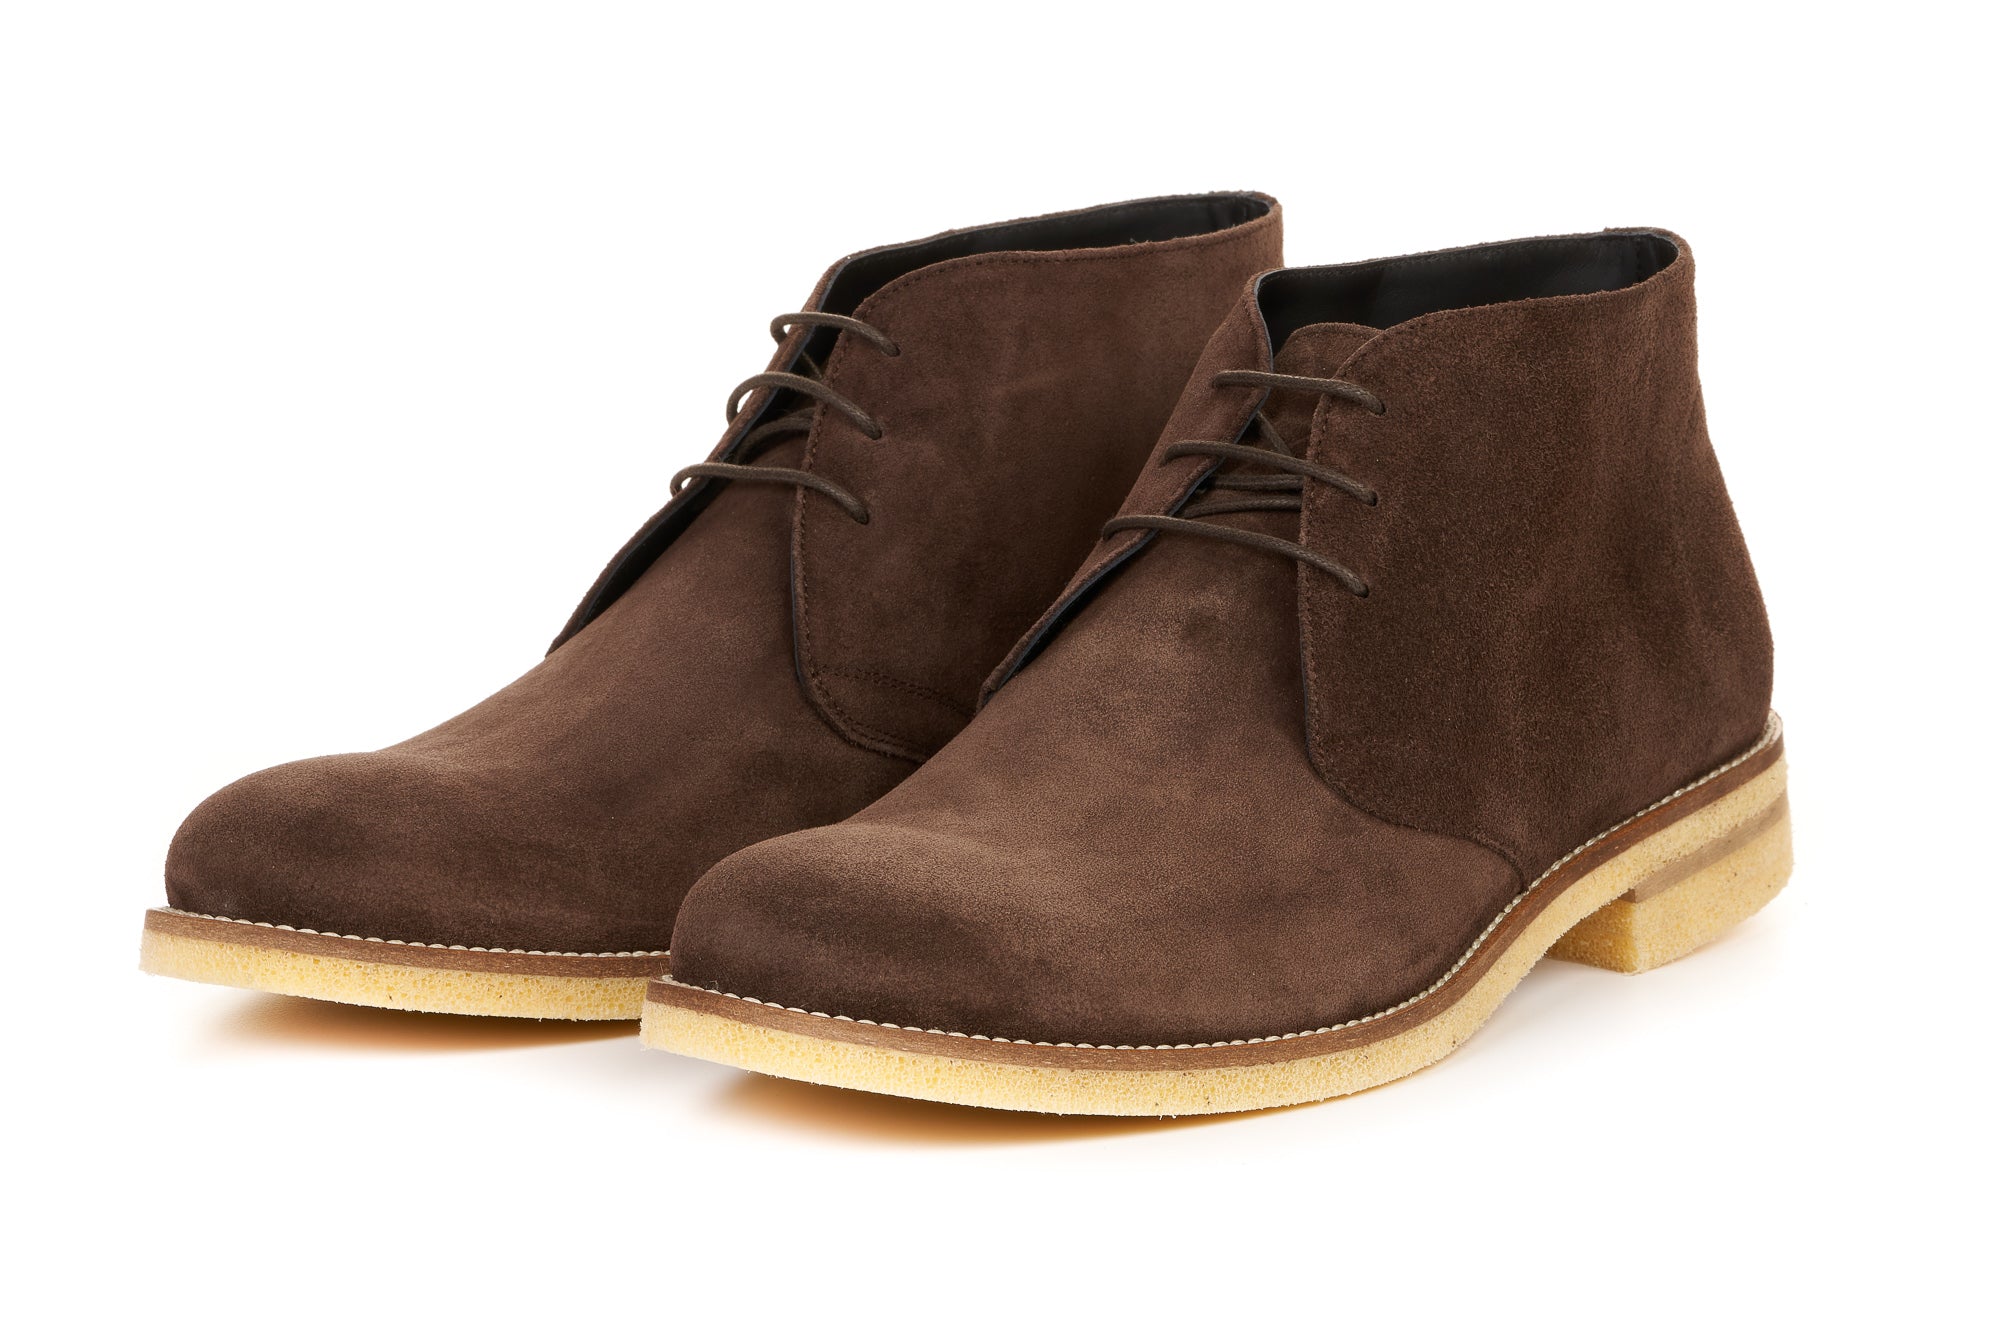 The Lawrence Chukka Boot - Dark Brown Suede